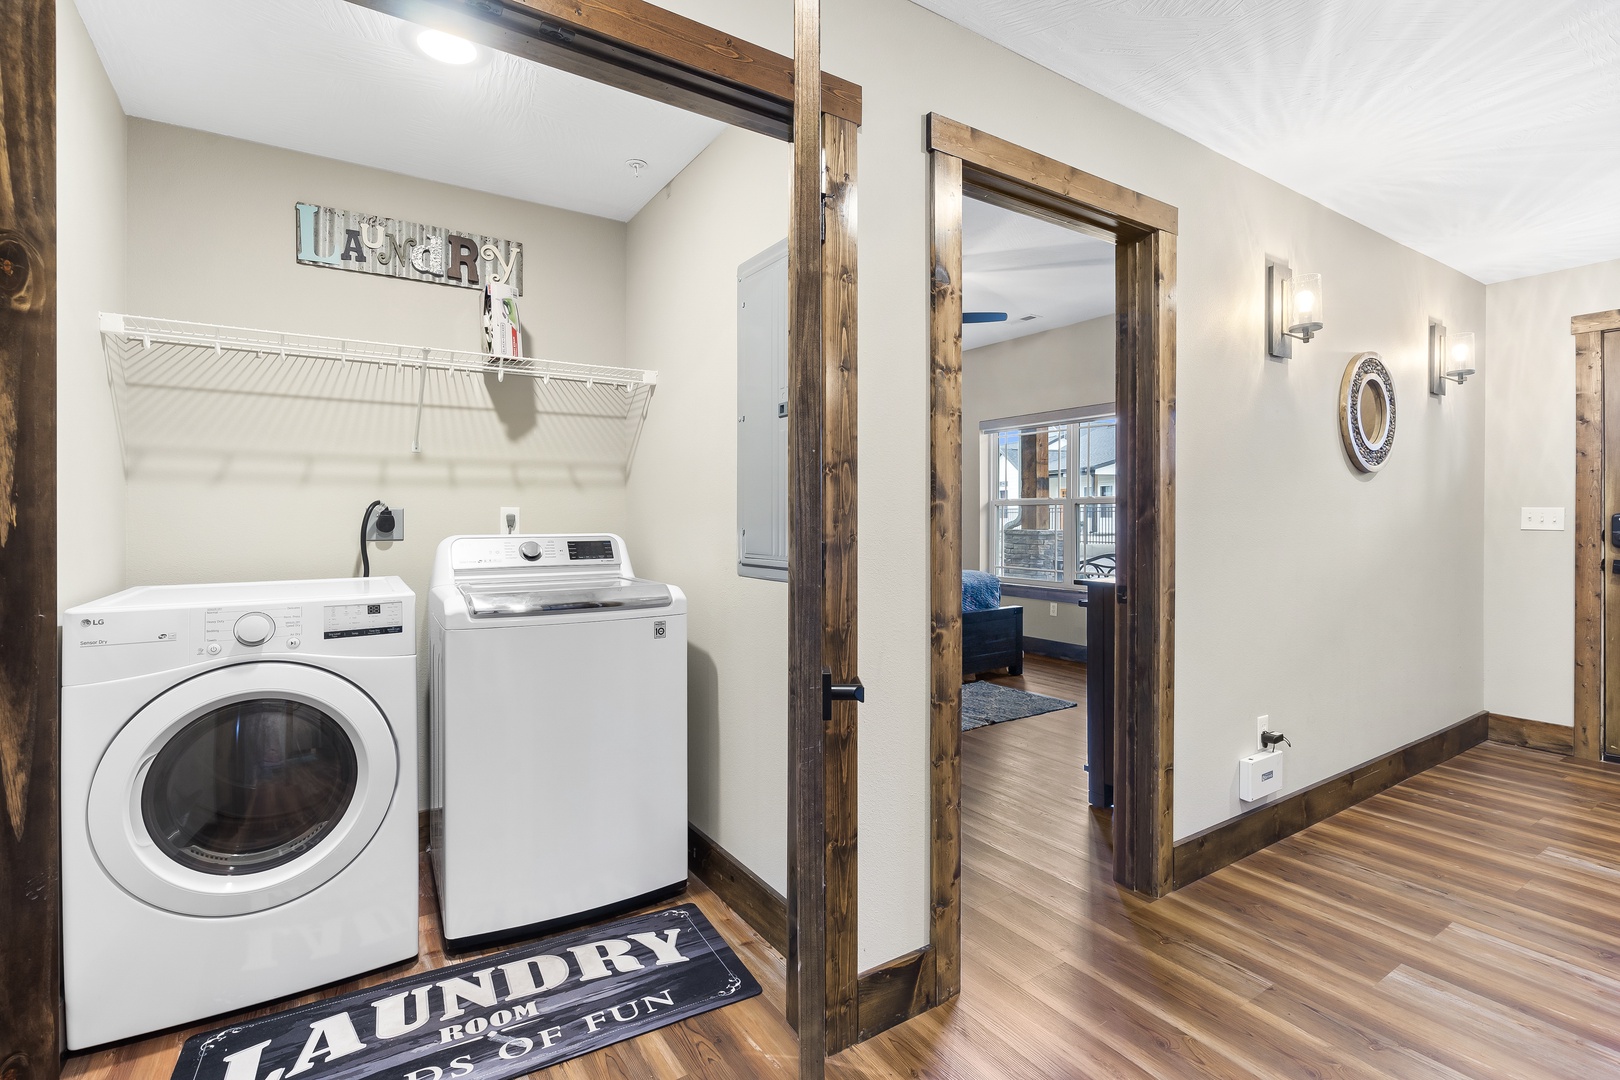 Private laundry is available for your stay on the second floor